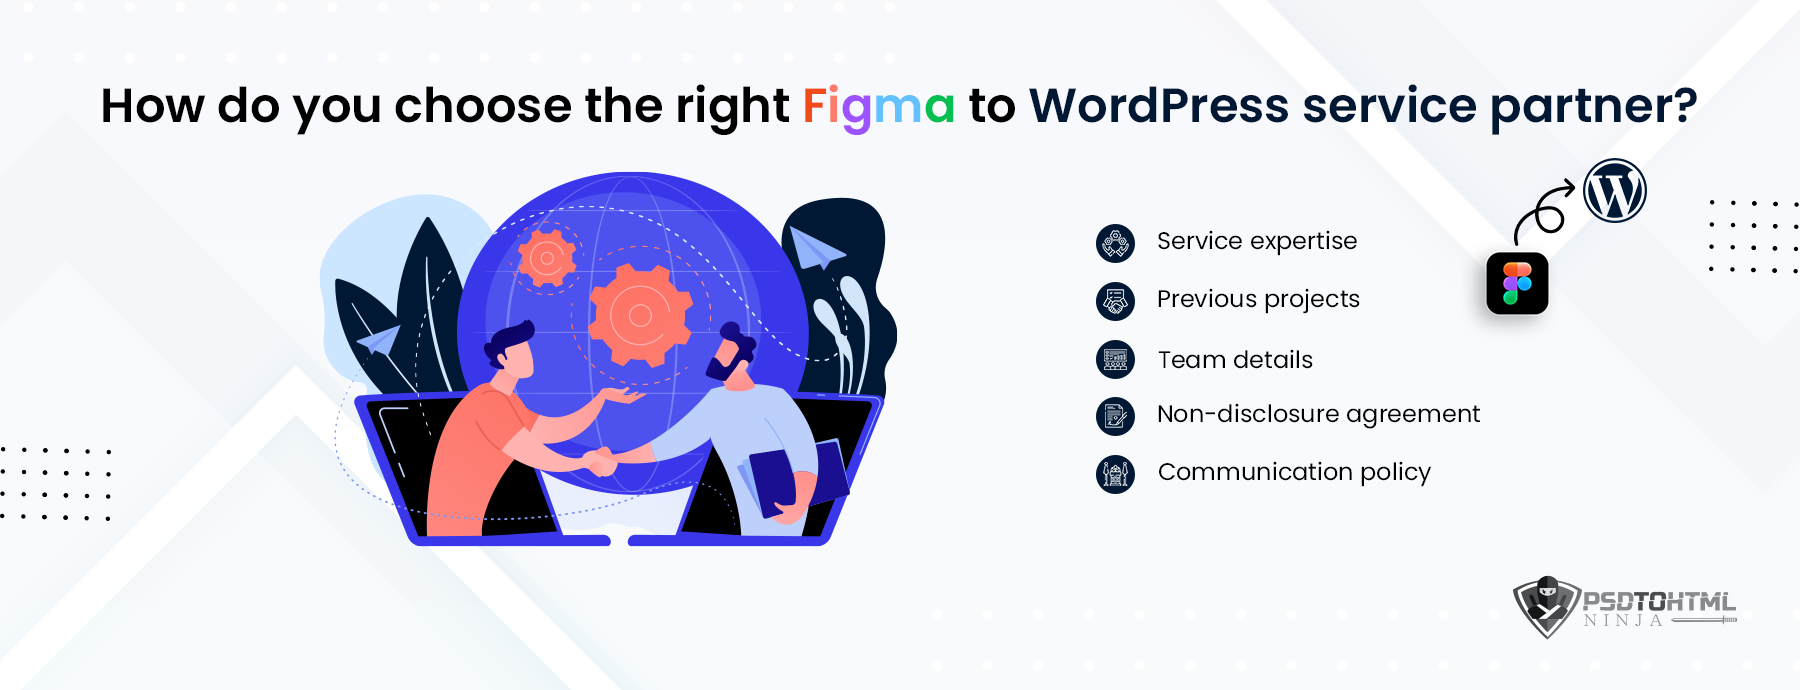 How do you choose the right Figma to WordPress service partner